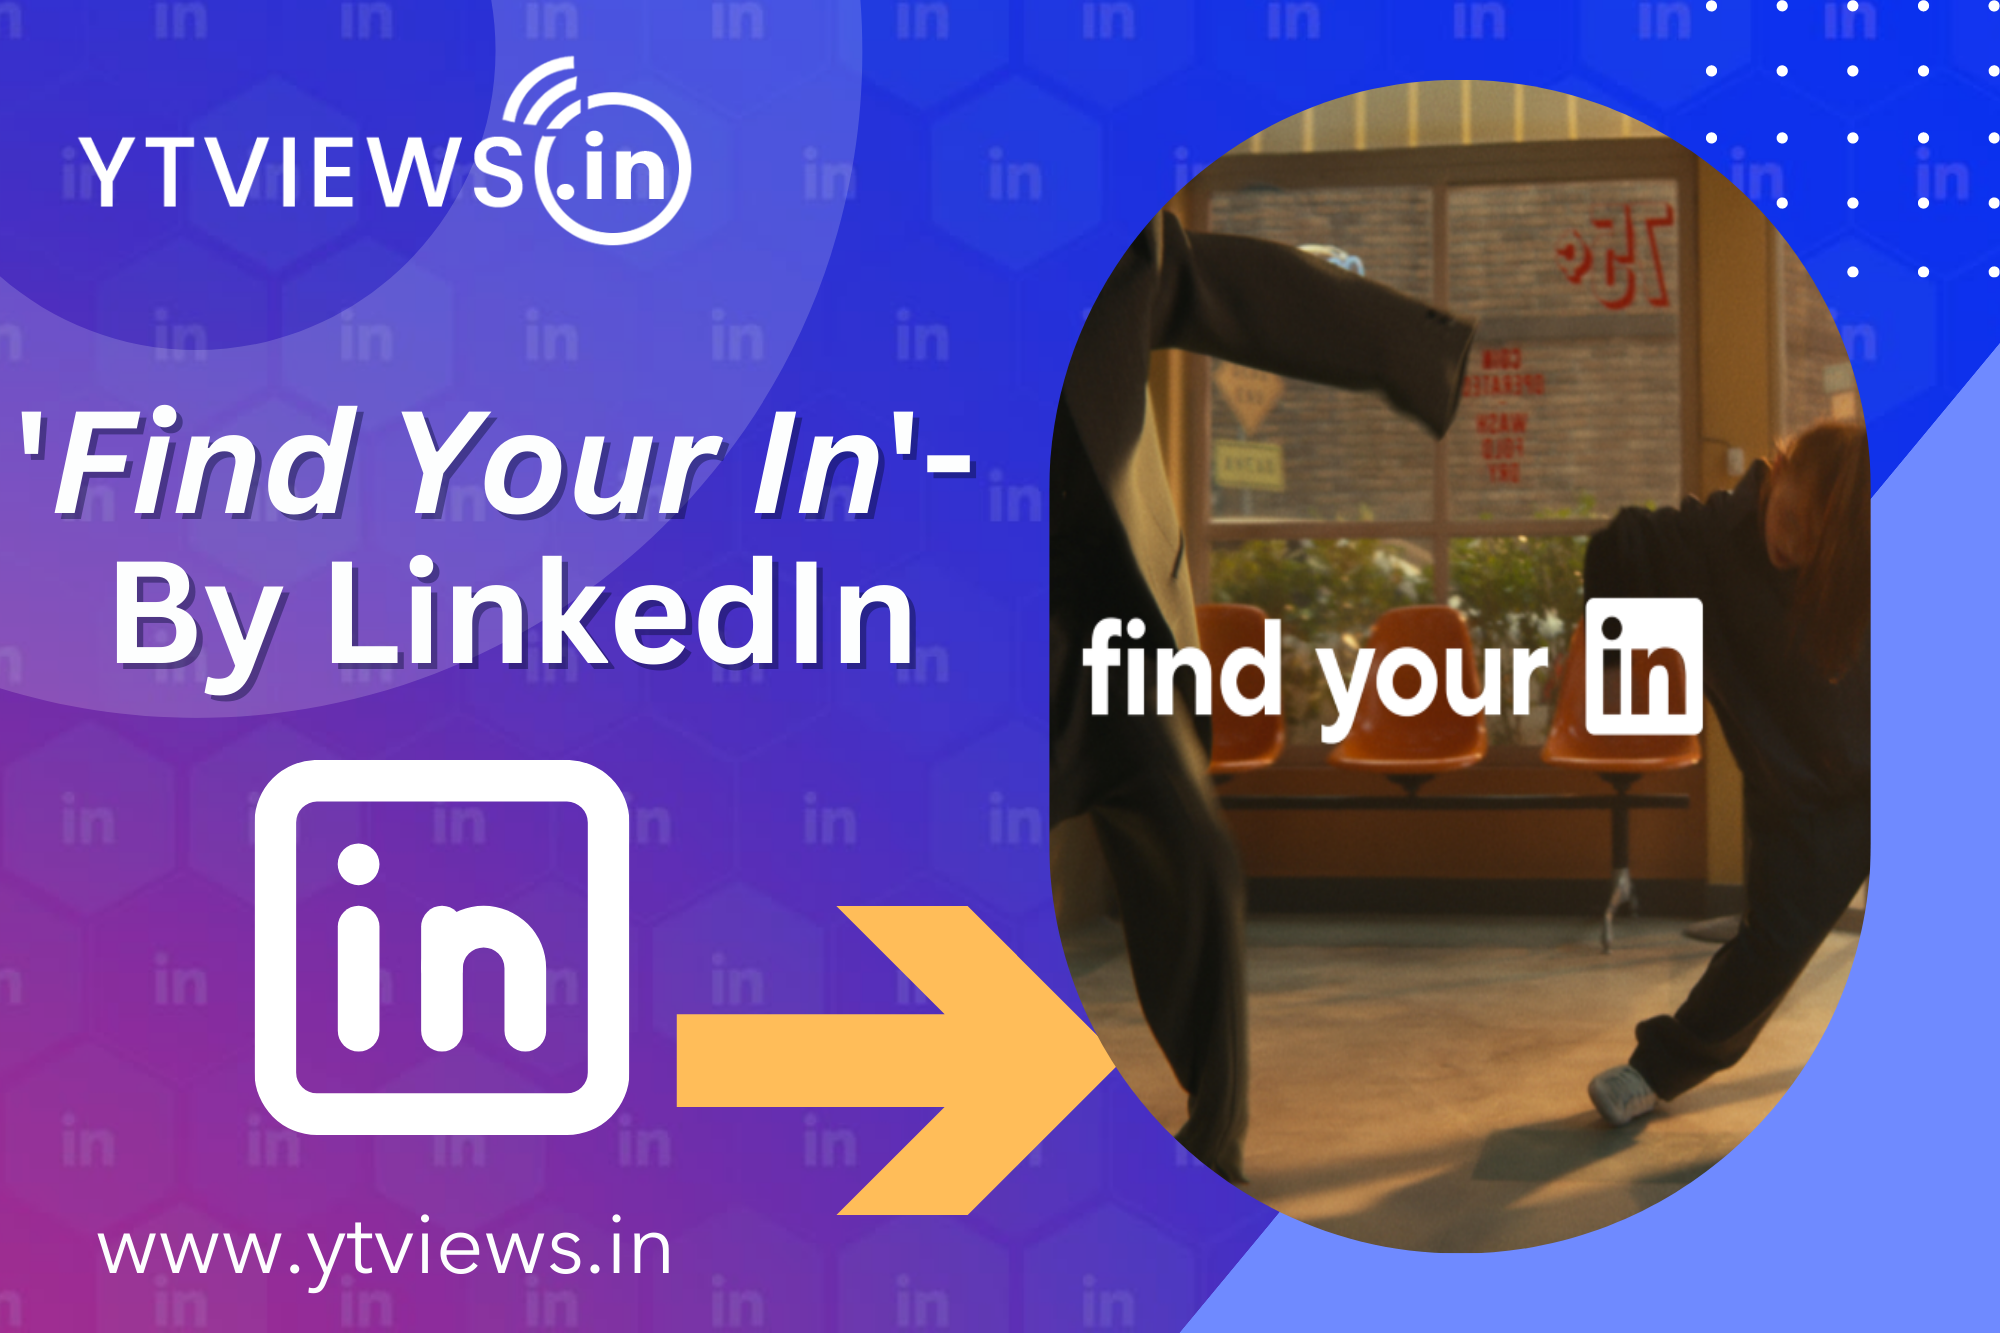 All new “Find your In” ad campaign launched by LinkedIn